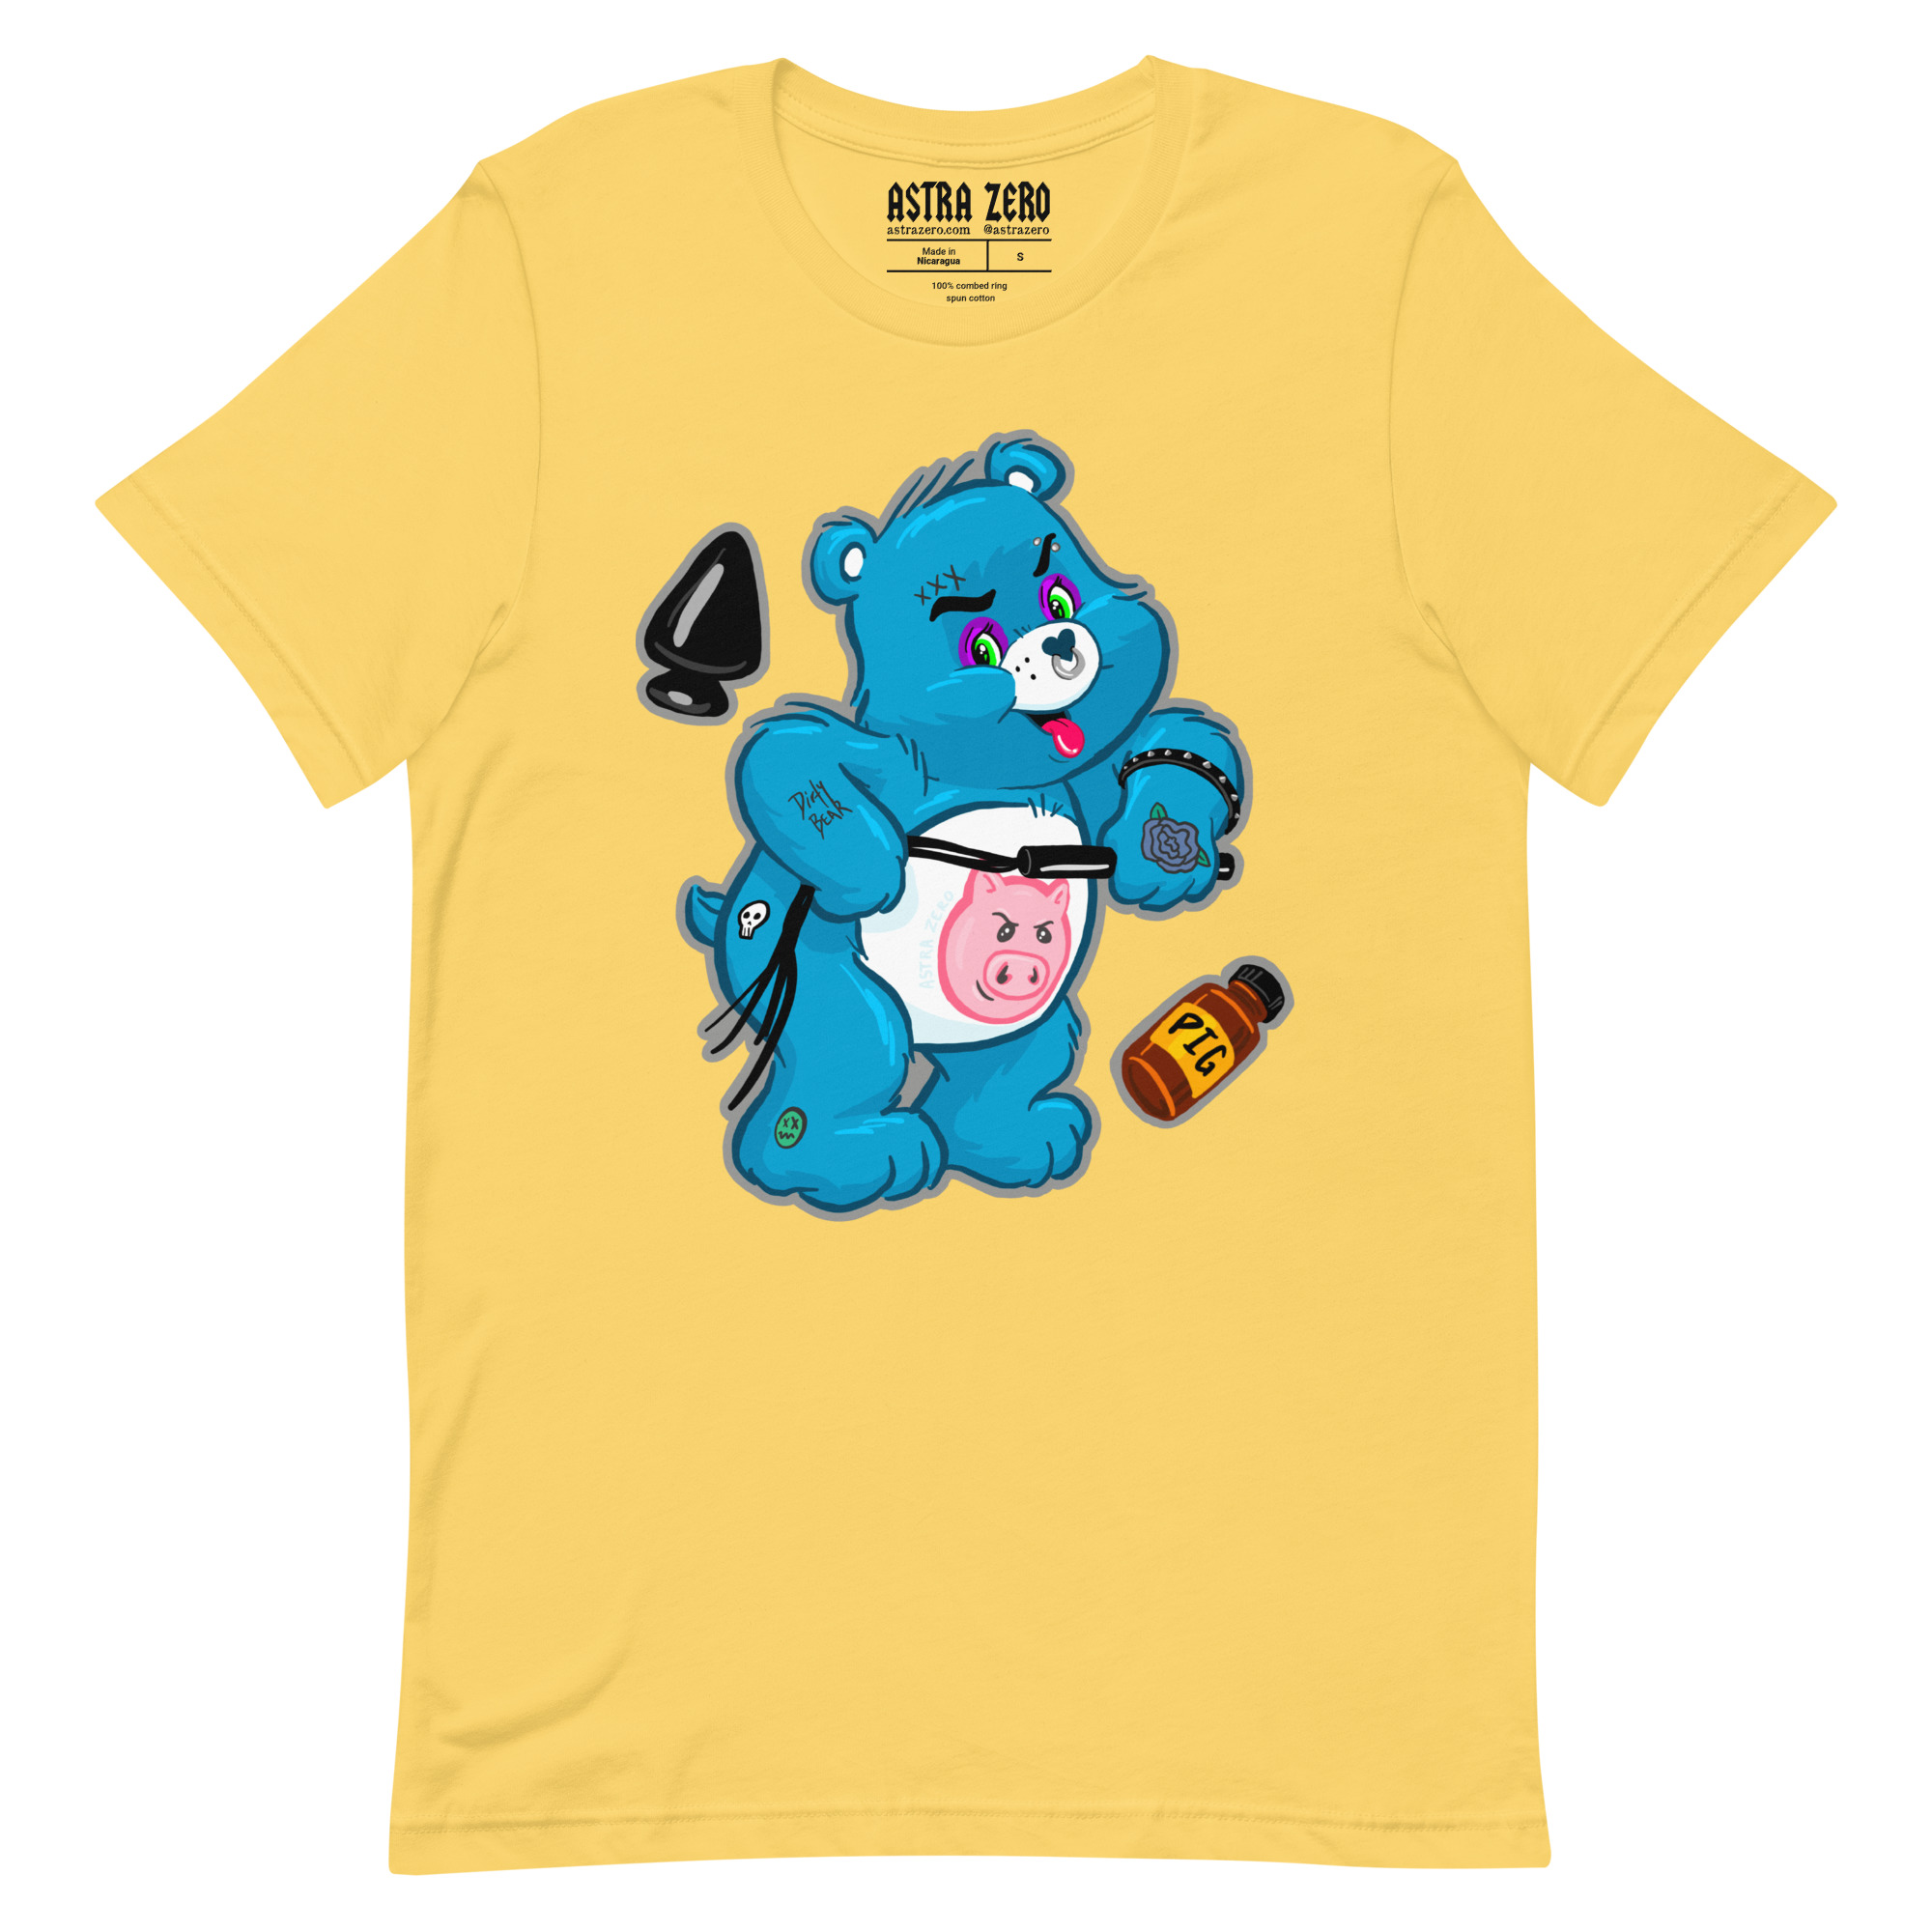 Featured image for “Dirty Bear - Unisex t-shirt”